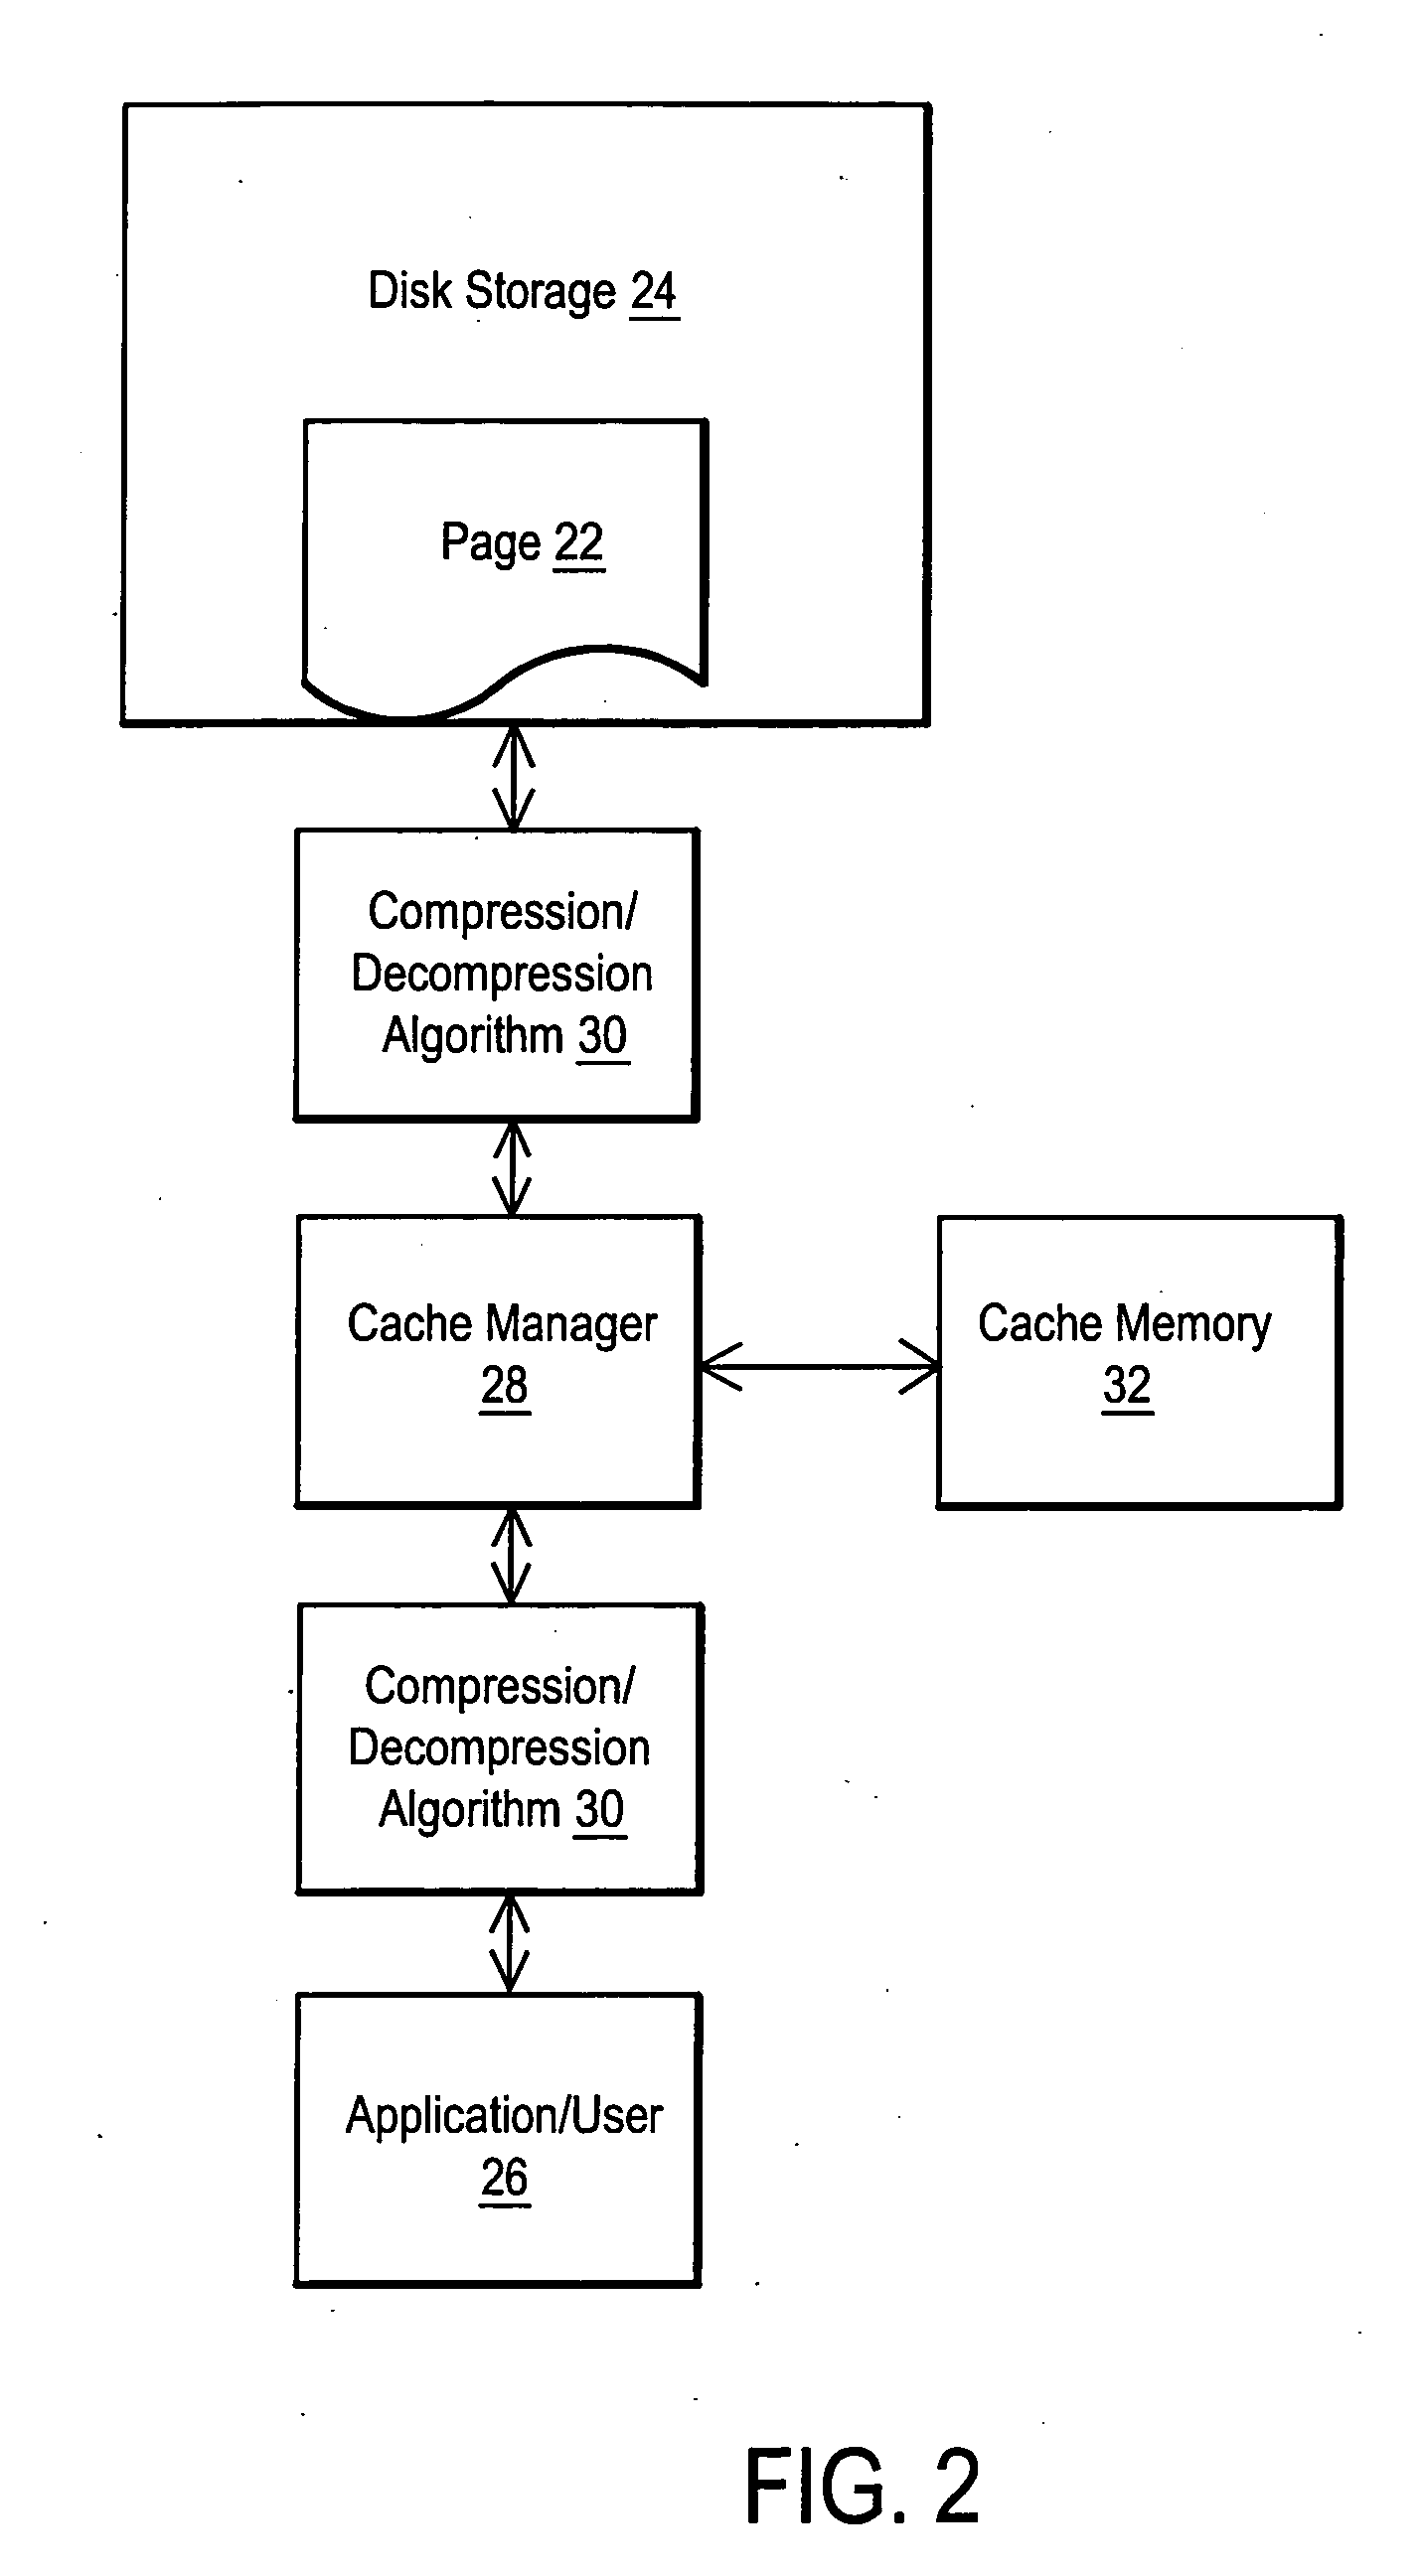 System and method for utilizing compression in database caches to facilitate access to database information